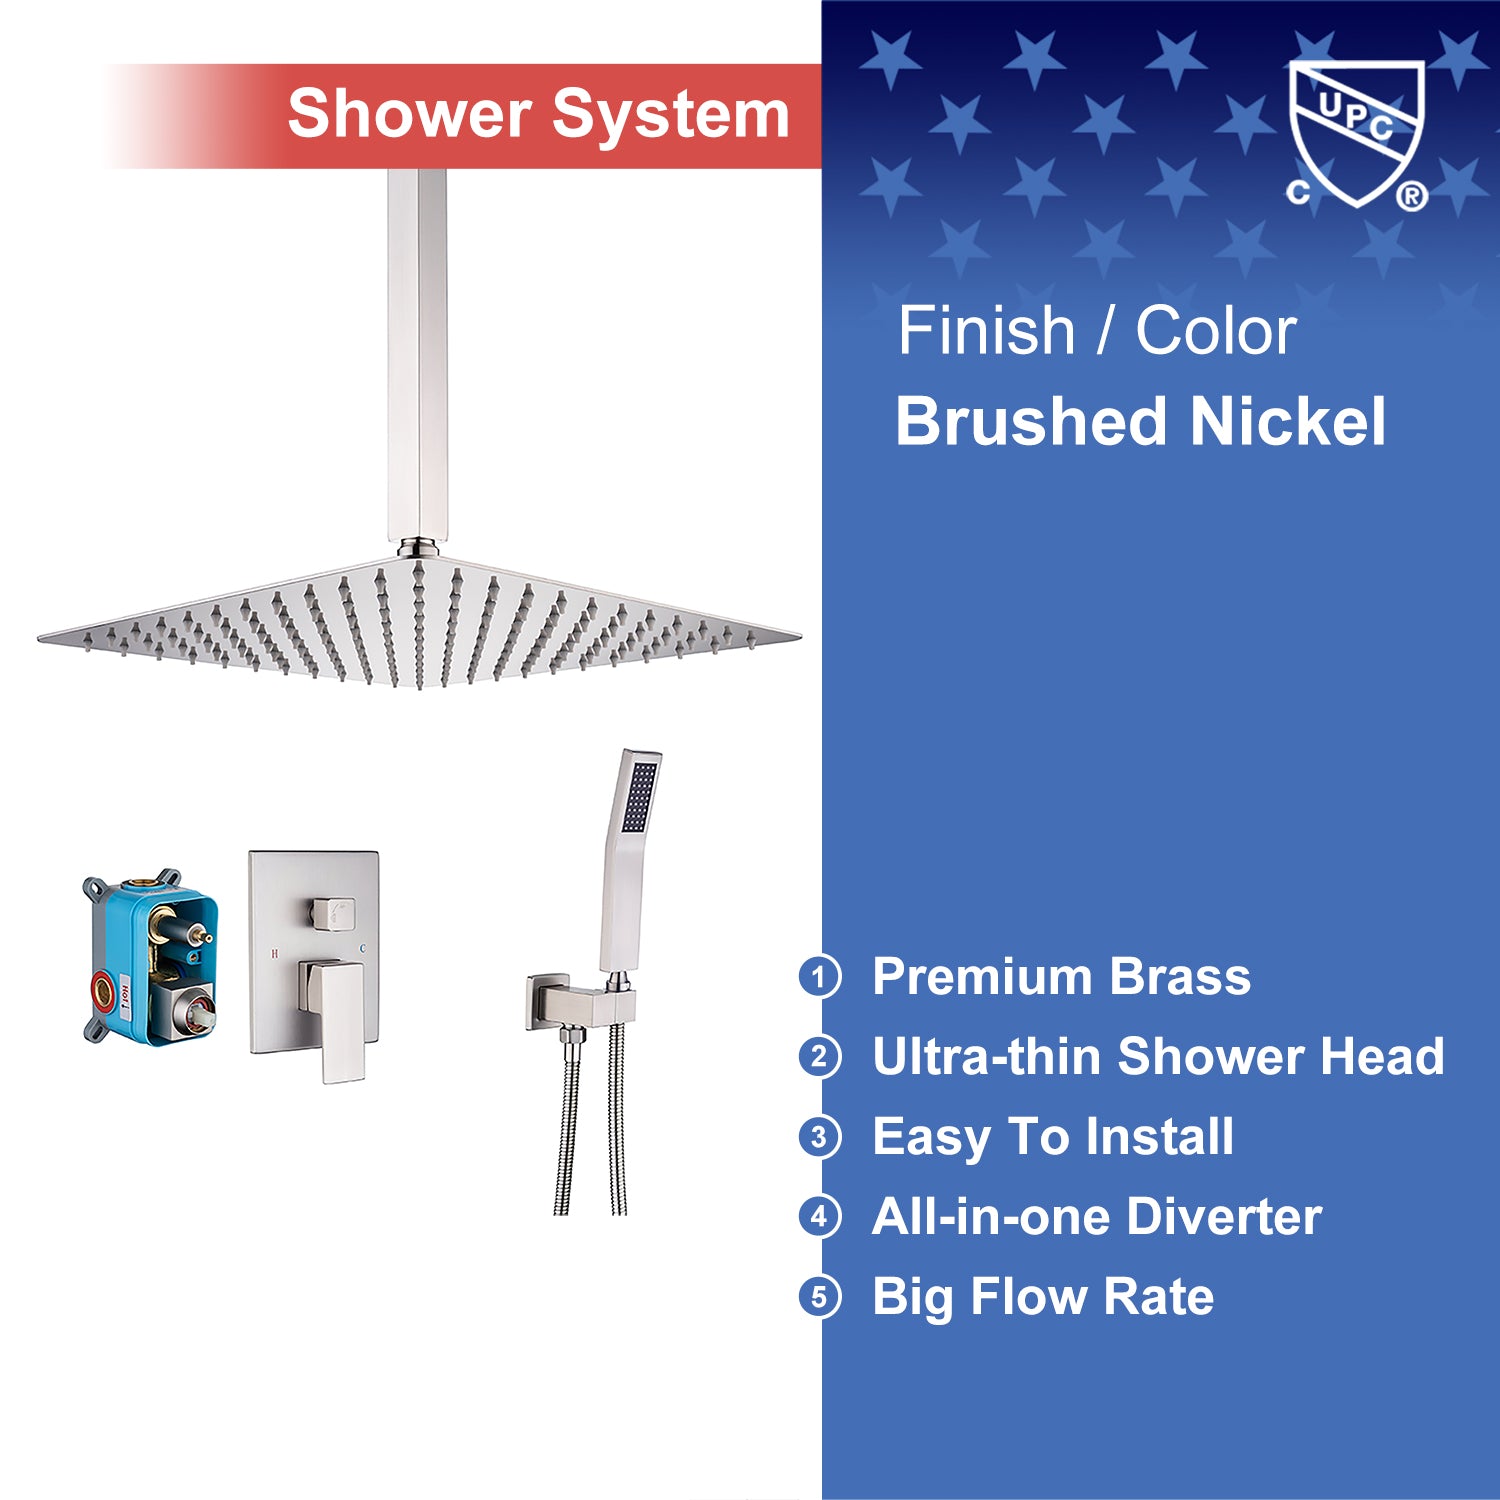 12" Shower Head 2-way Ceiling-Mount Square Shower Faucet with Rough-in Valve RX95102-12